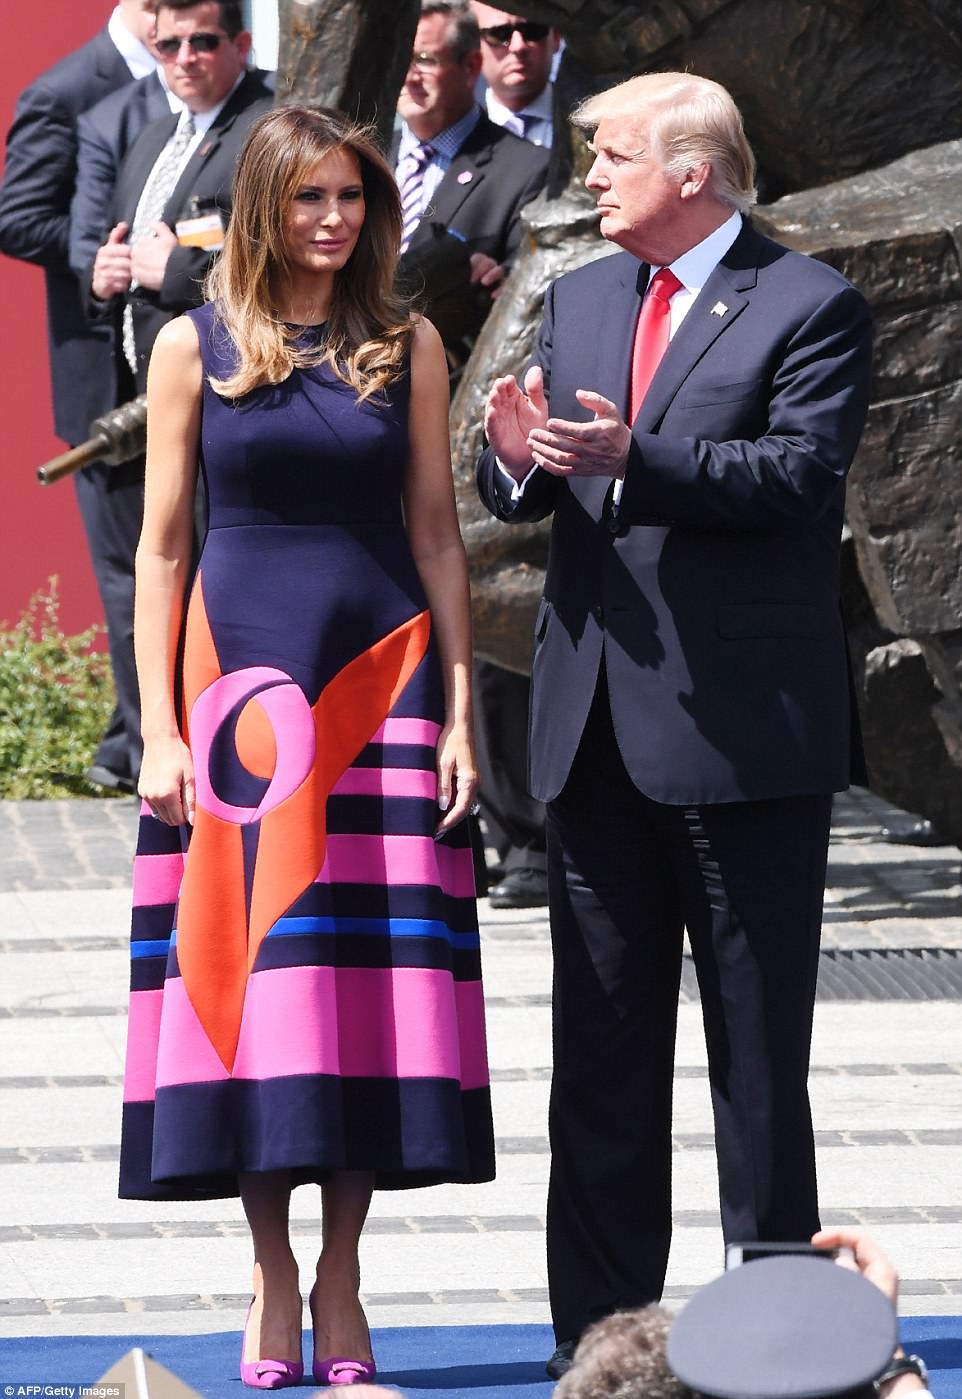 421569B400000578-4671474-Terrific_trip_Melania_later_raved_about_her_visit_and_the_childr-a-55_1499352674697